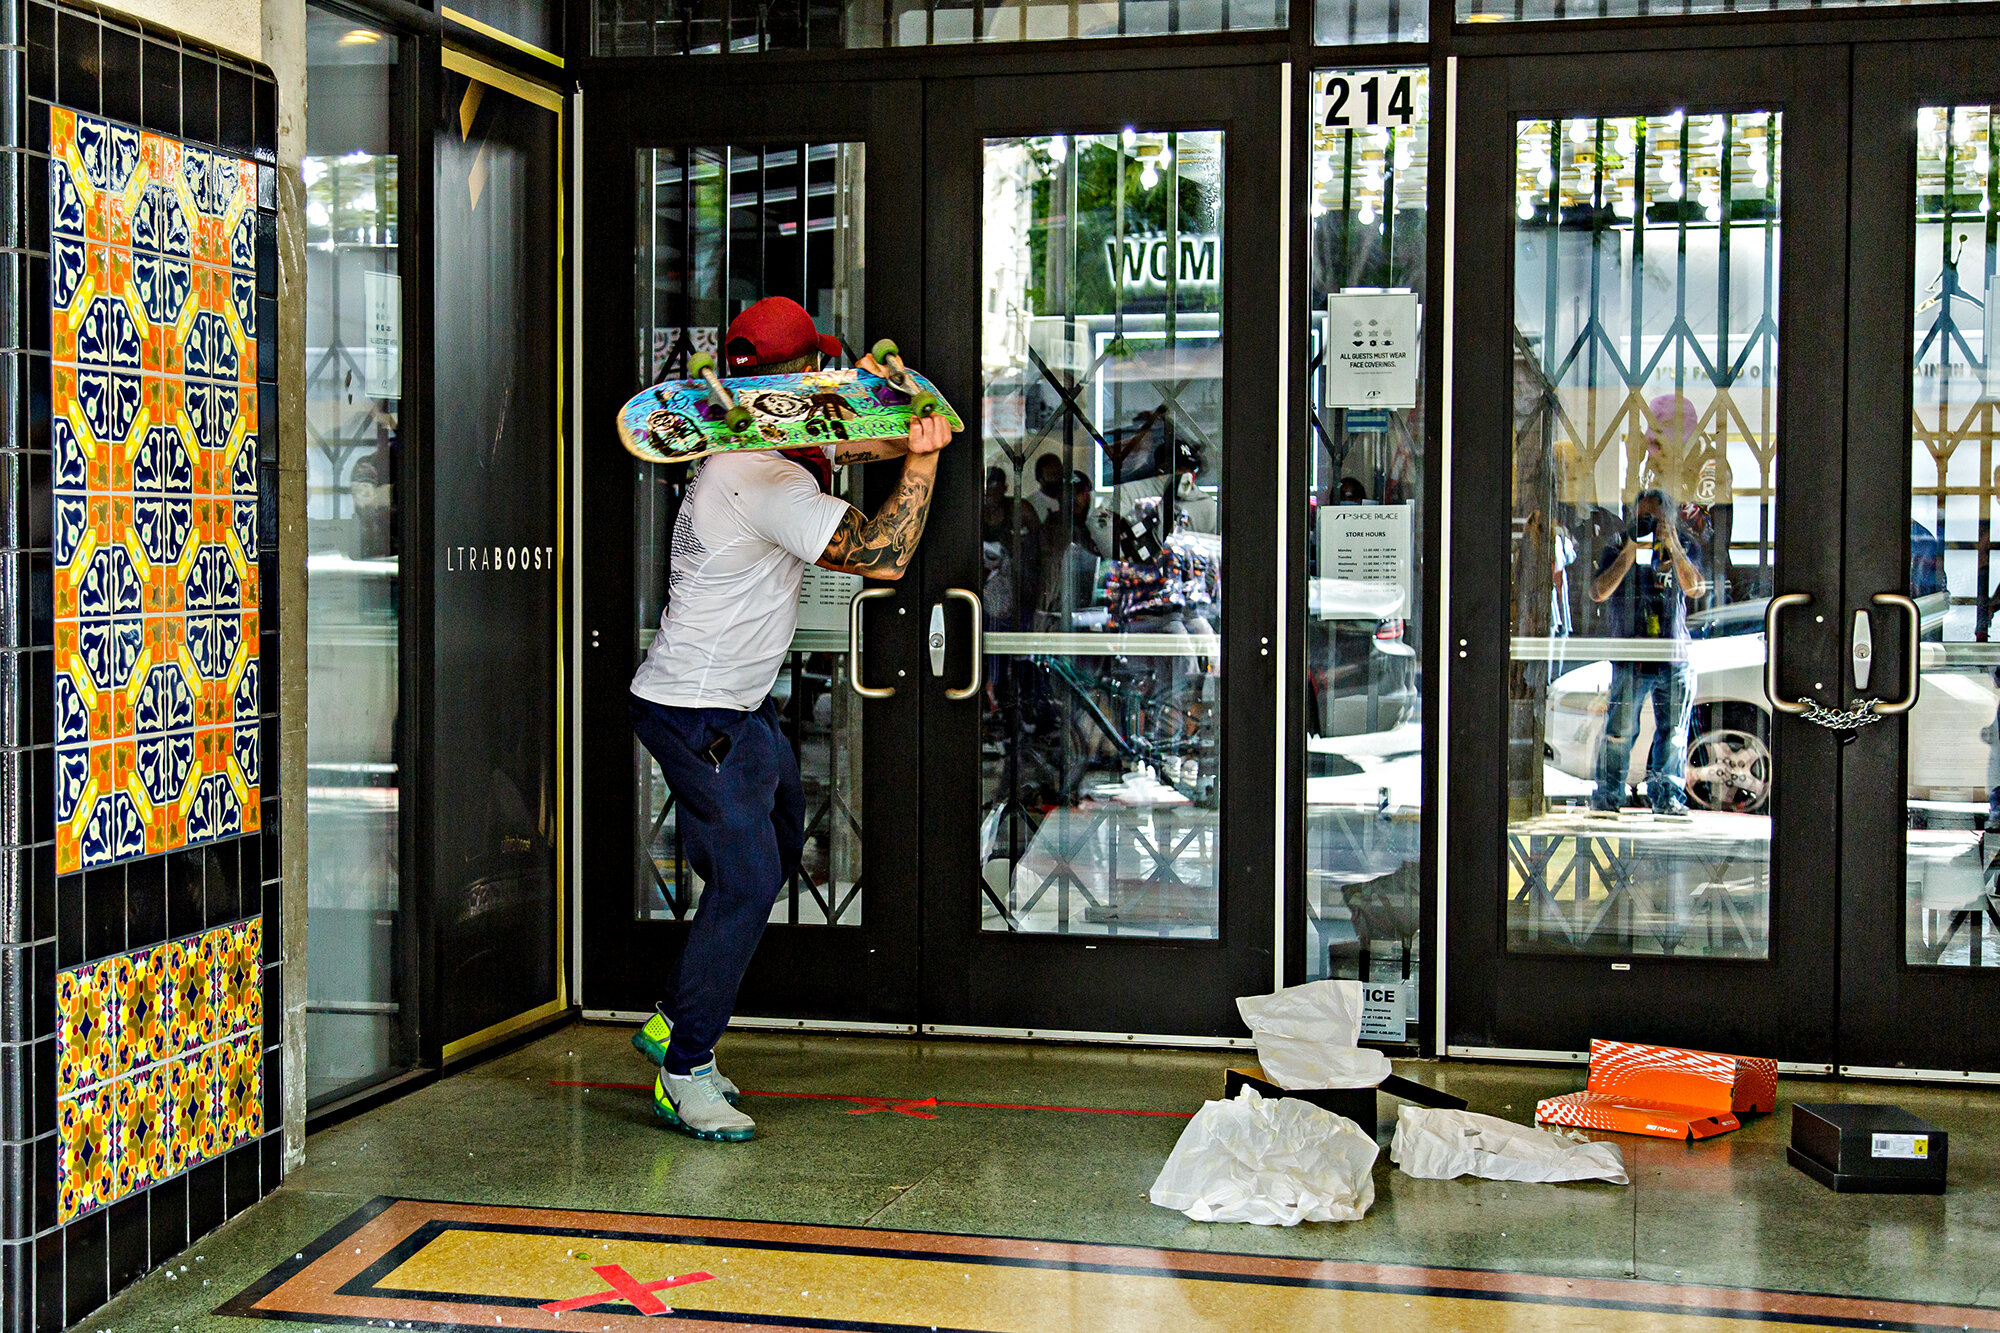  A man uses a skateboard to try to break into the Shoe Palace store on Santa Monica Blvd., in Santa Monica, Calif., on Sunday, May 31, 2020. 